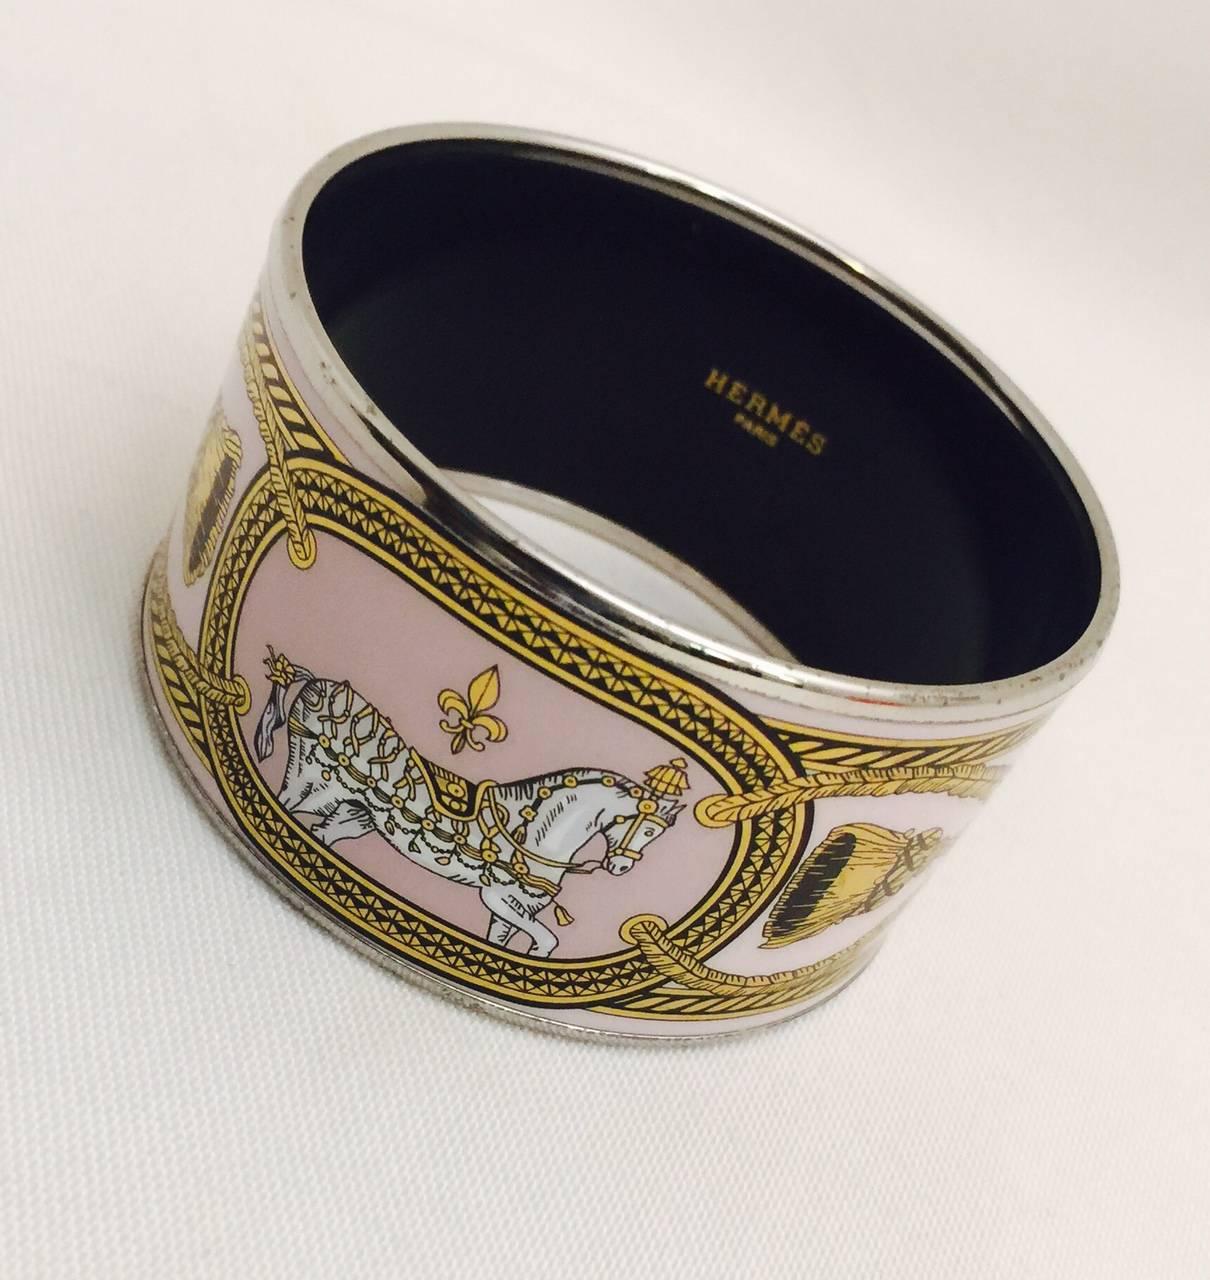 Hermes enamel cuffs are recognizable at a glance.  Always stunning.  Always in style.  A wear it daily piece!  This Grand Apparet cuff features stand out pink enamel, a dress parade horse, 'rope' detail ending in tassels.  Medium size.
Properly